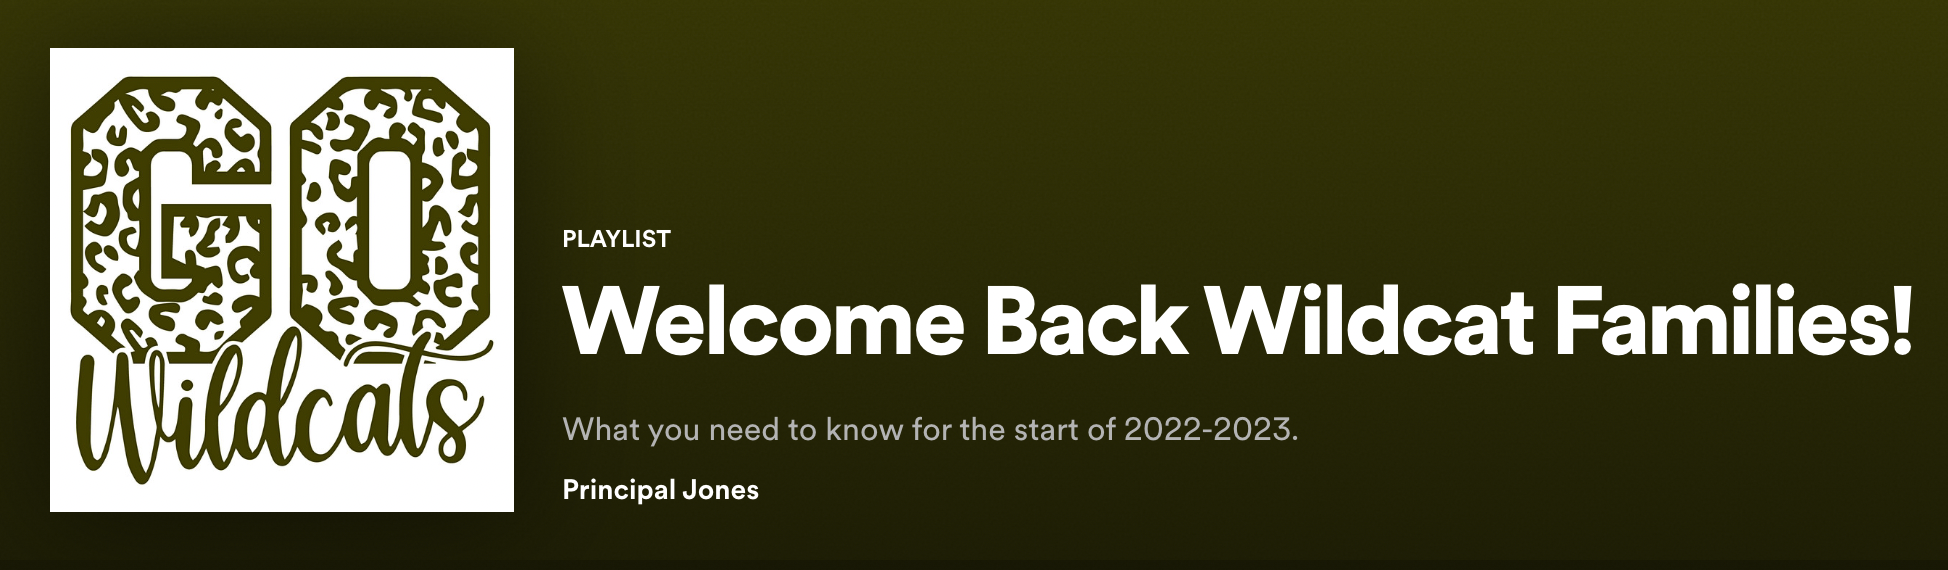 Image of a Playlist Welcome Back Wildcat Families